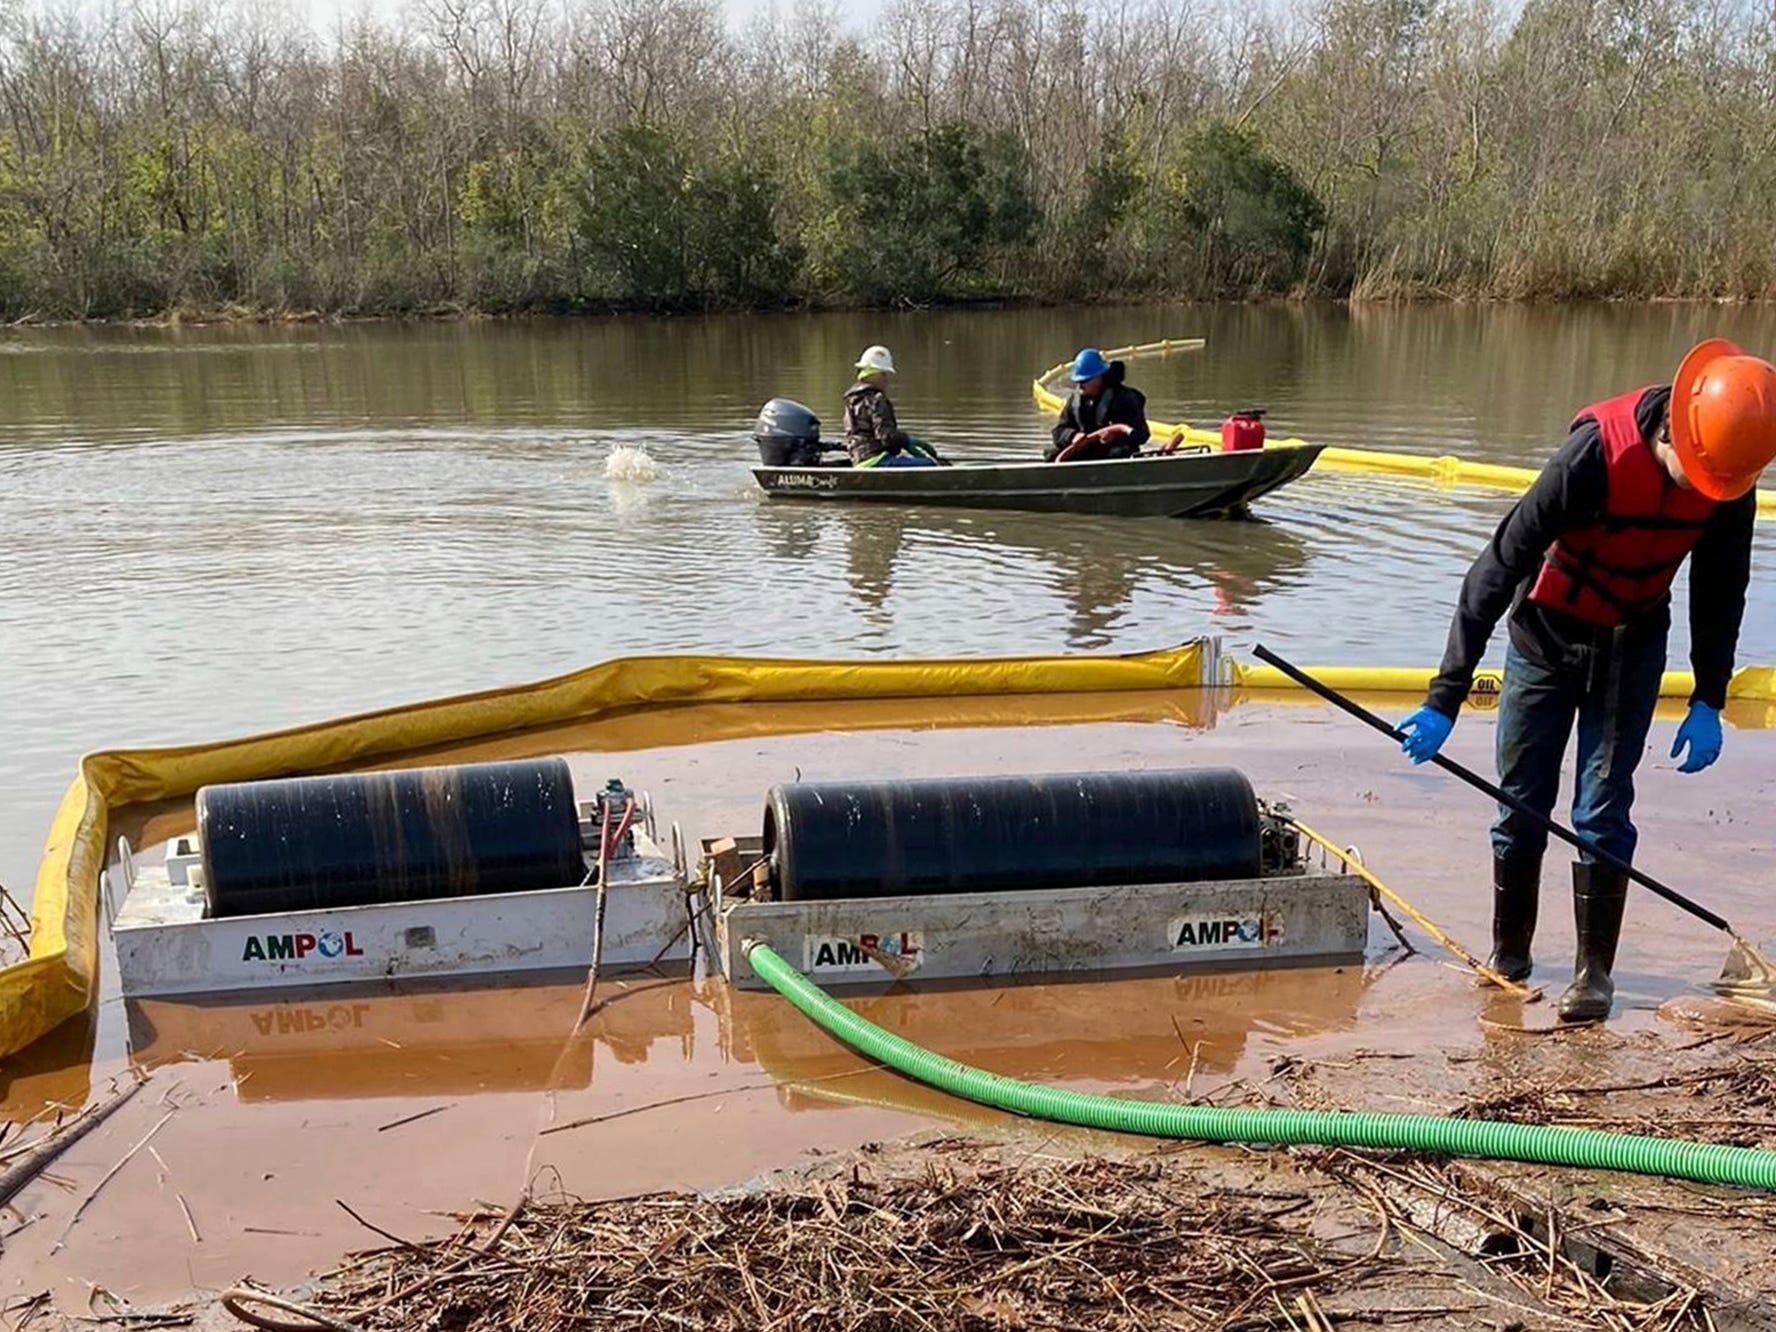 This undated photo provided by the Louisiana Department of Environmental Quality on Wednesday, Jan. 12, 2022, shows cleanup work at the site where more than 300,000 gallons of diesel spilled on Dec. 27, 2021, just outside New Orleans.